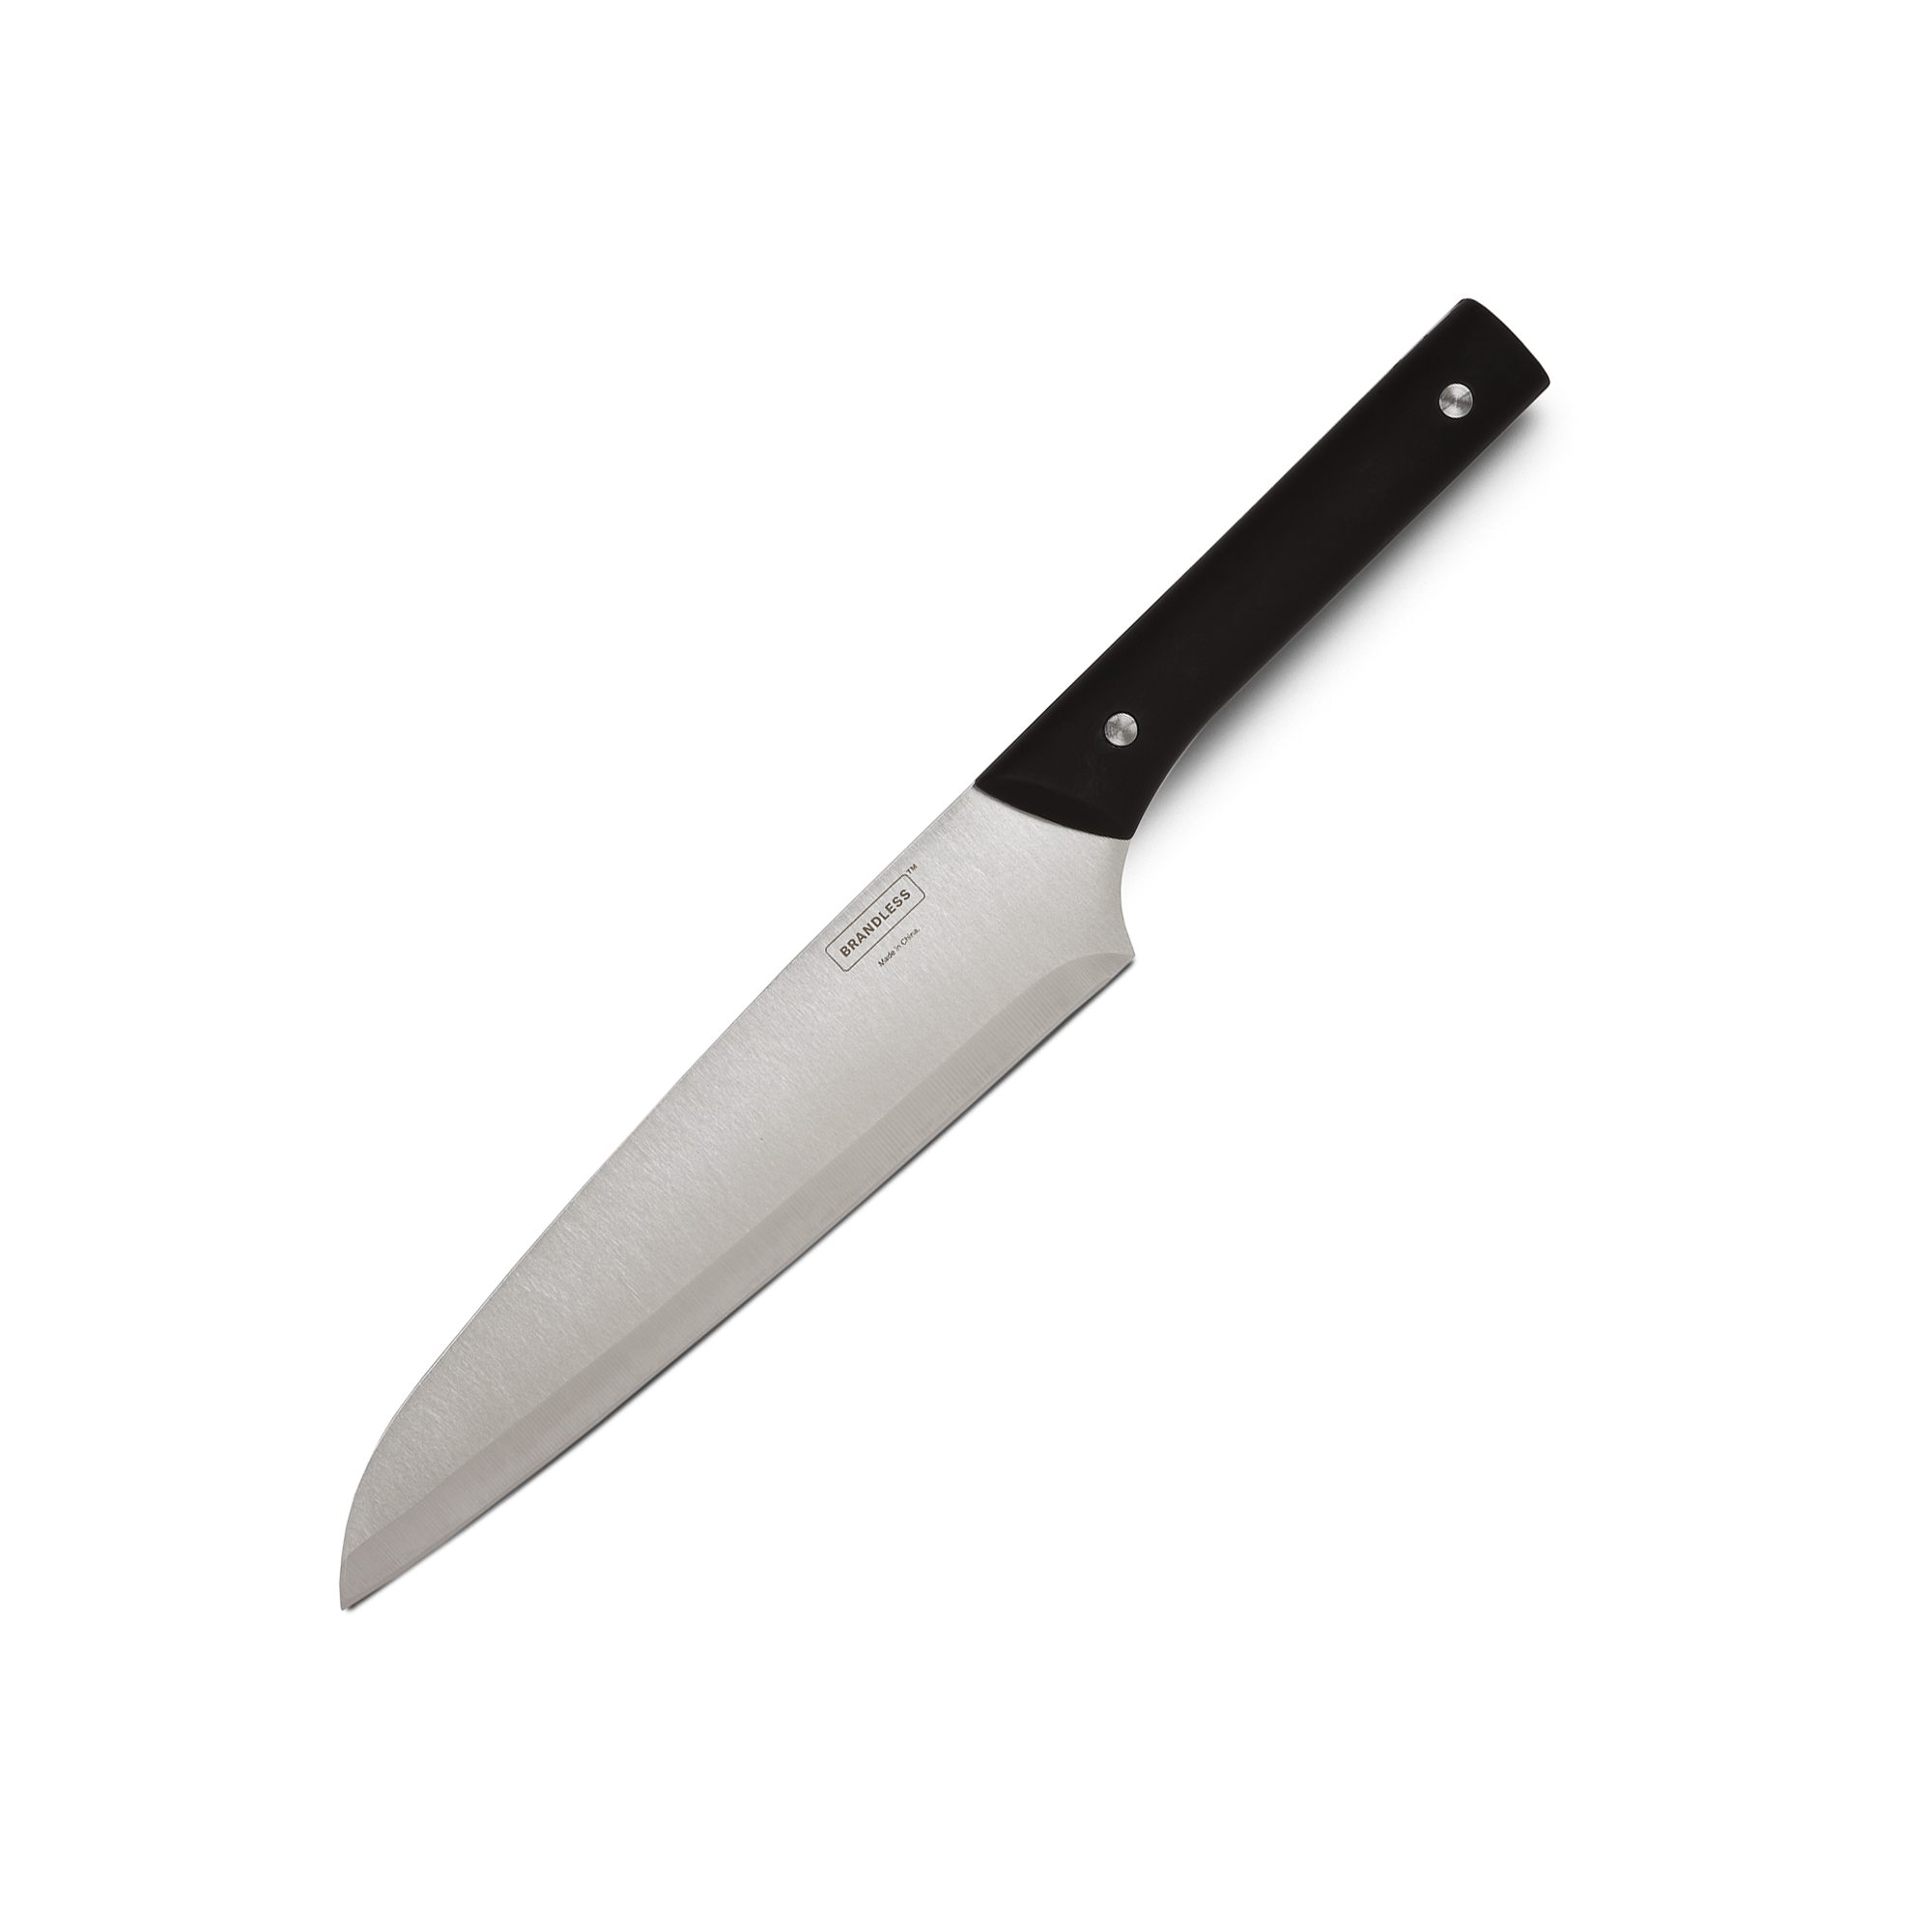 Just the Knives: Slice & Dice Set - Brandless